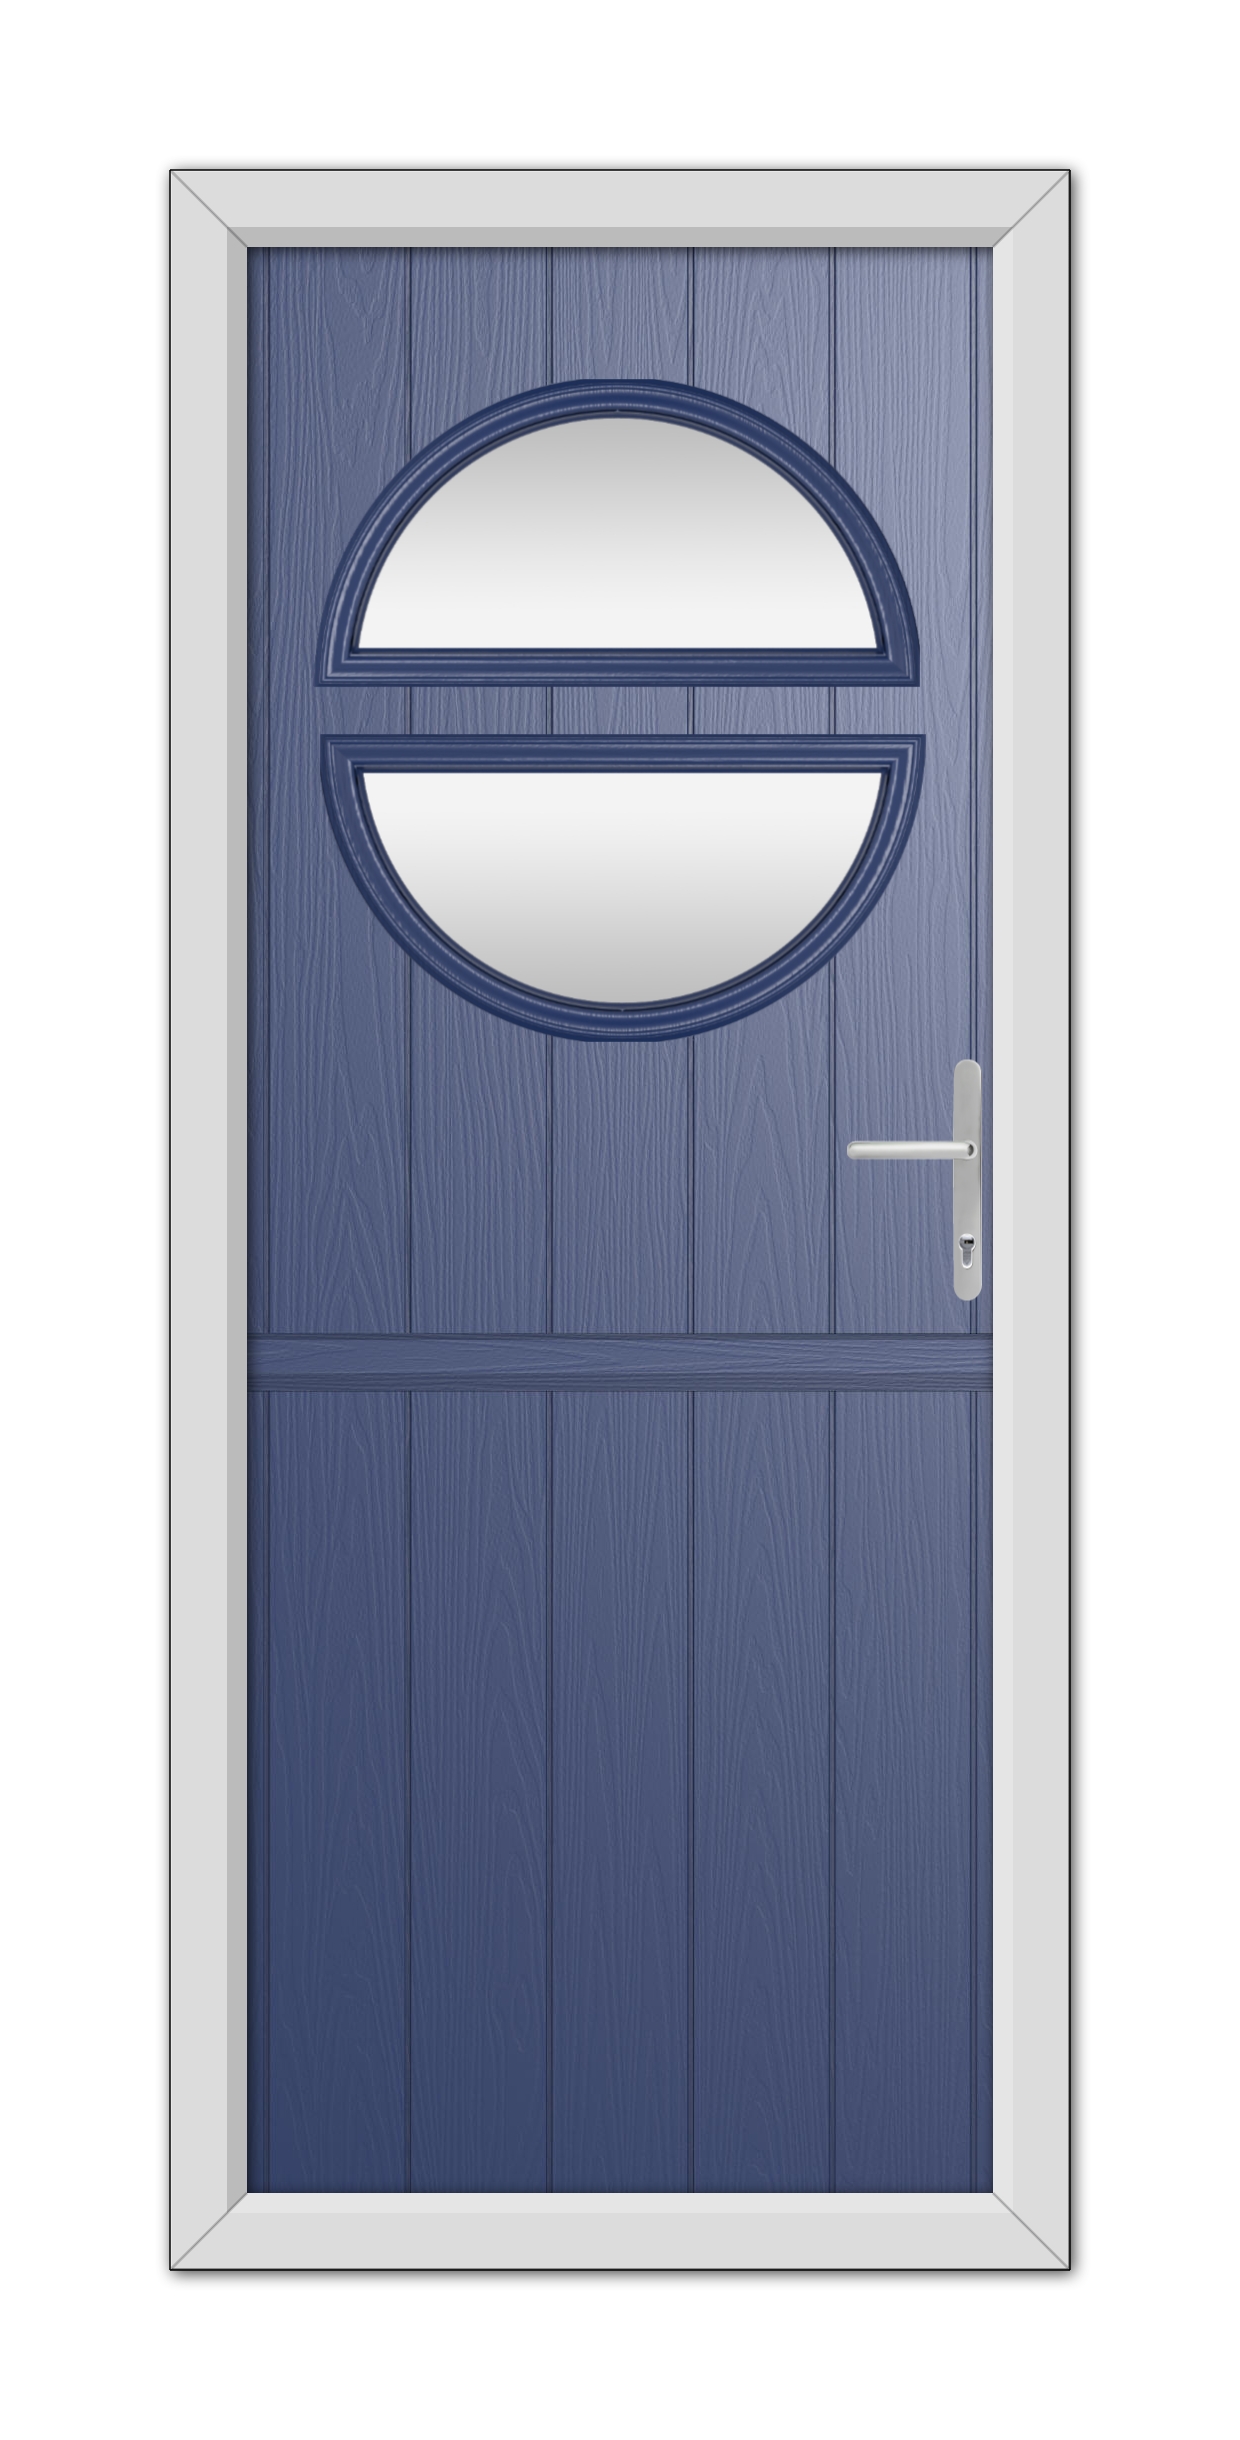 A modern Blue Kent Stable Composite Door 48mm Timber Core with an oval window at the top, featuring a horizontal white handle, within a grey frame.